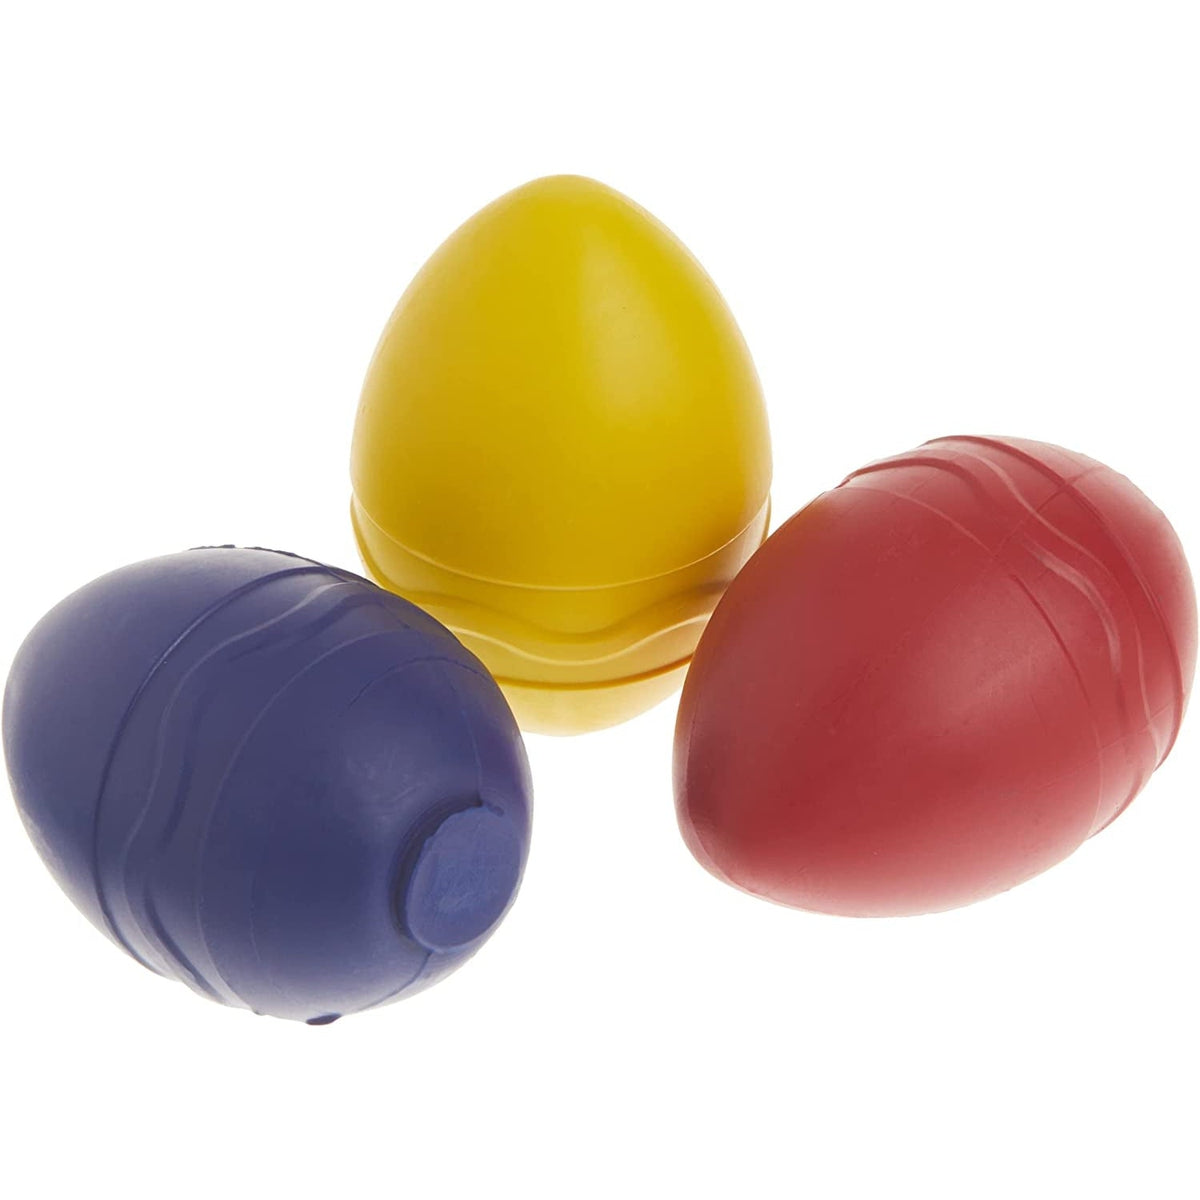 Crayola palm grip large egg crayons – Dilly Dally Kids